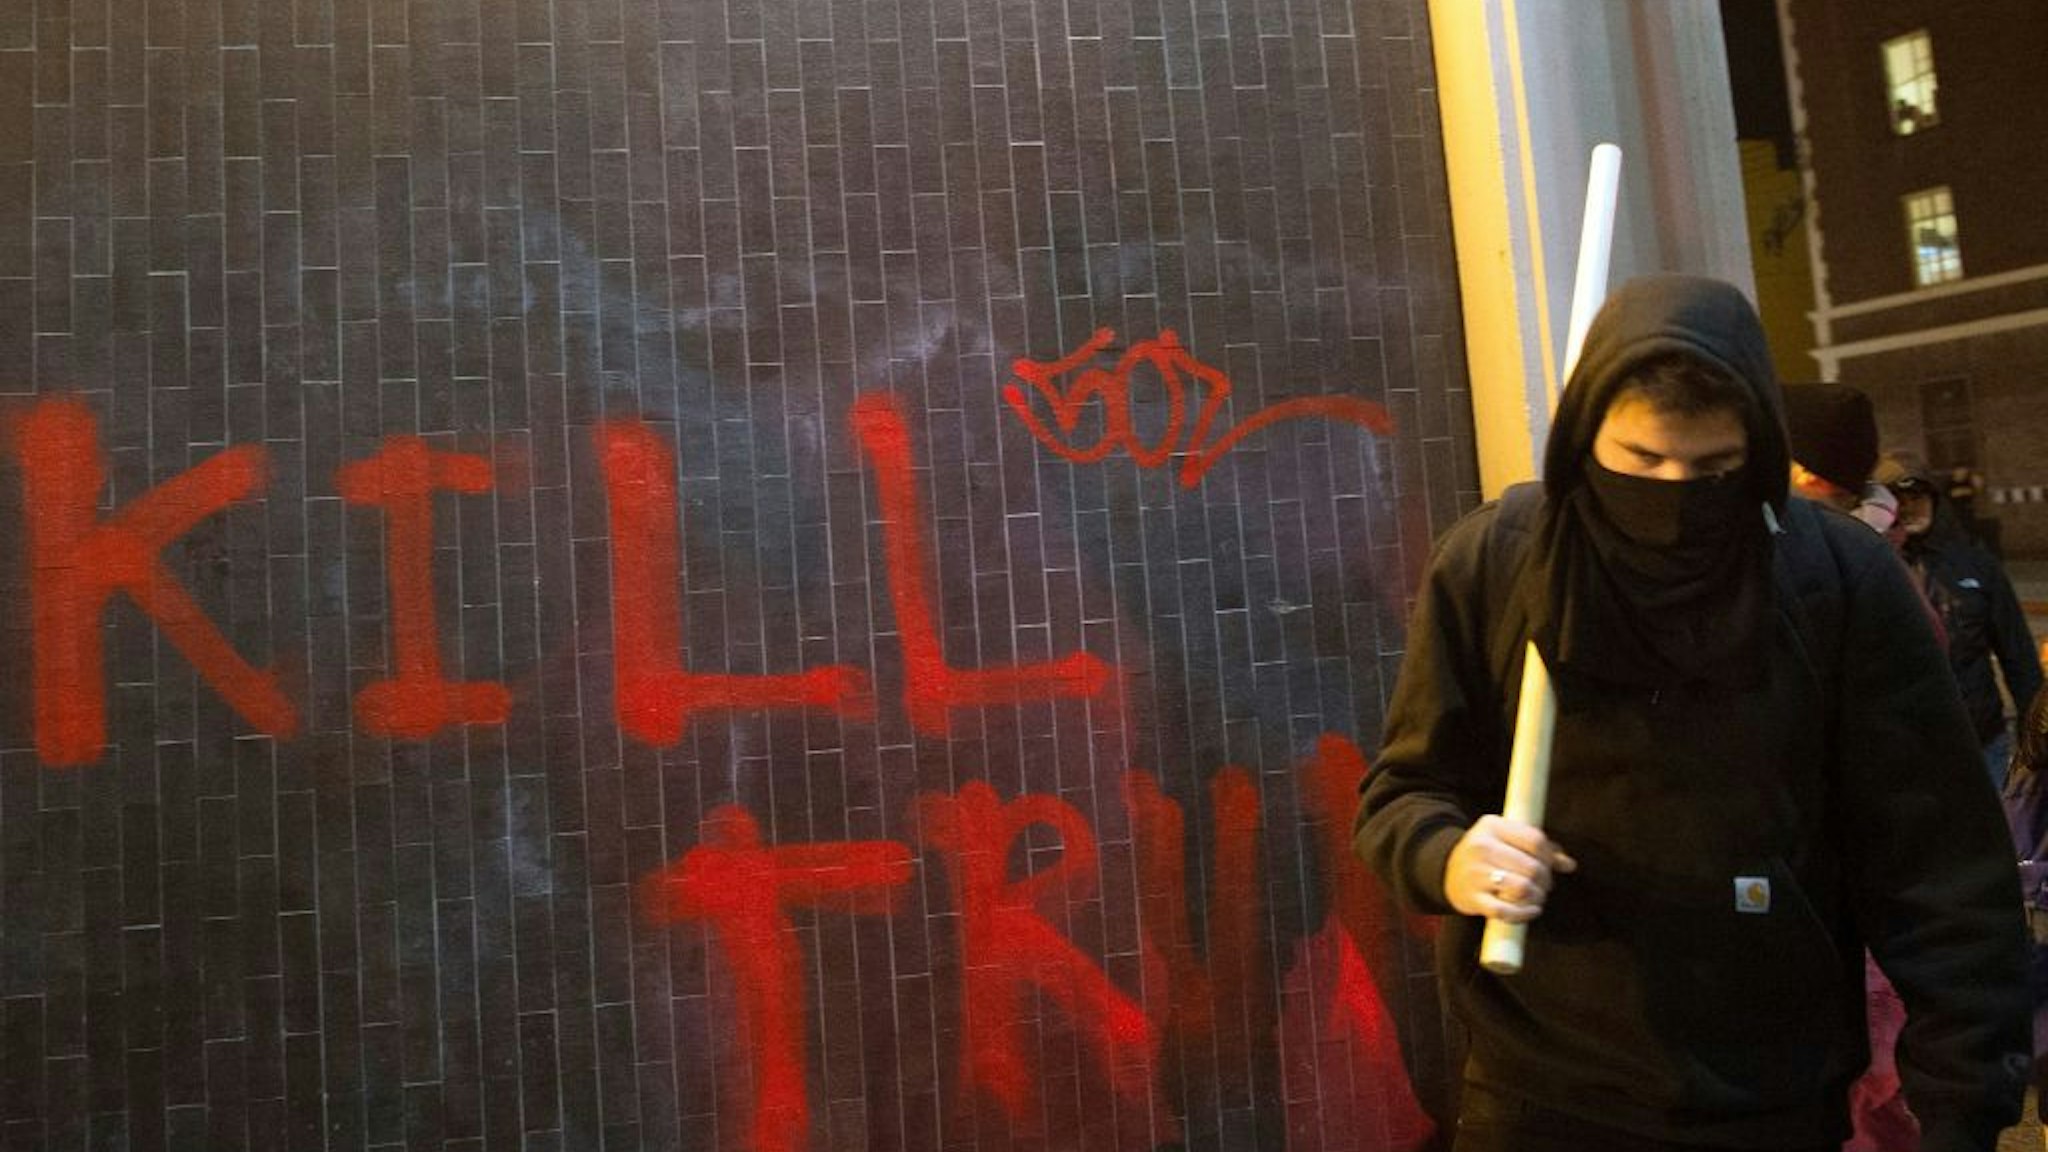 A protester walks with a pipe near graffiti in Berkeley, California on February 1, 2017. - Violent protests erupted on February 1 at the University of California at Berkeley over the scheduled appearance of a controversial editor of the conservative news website Breitbart. (Photo by Josh Edelson / AFP) (Photo by JOSH EDELSON/AFP via Getty Images)